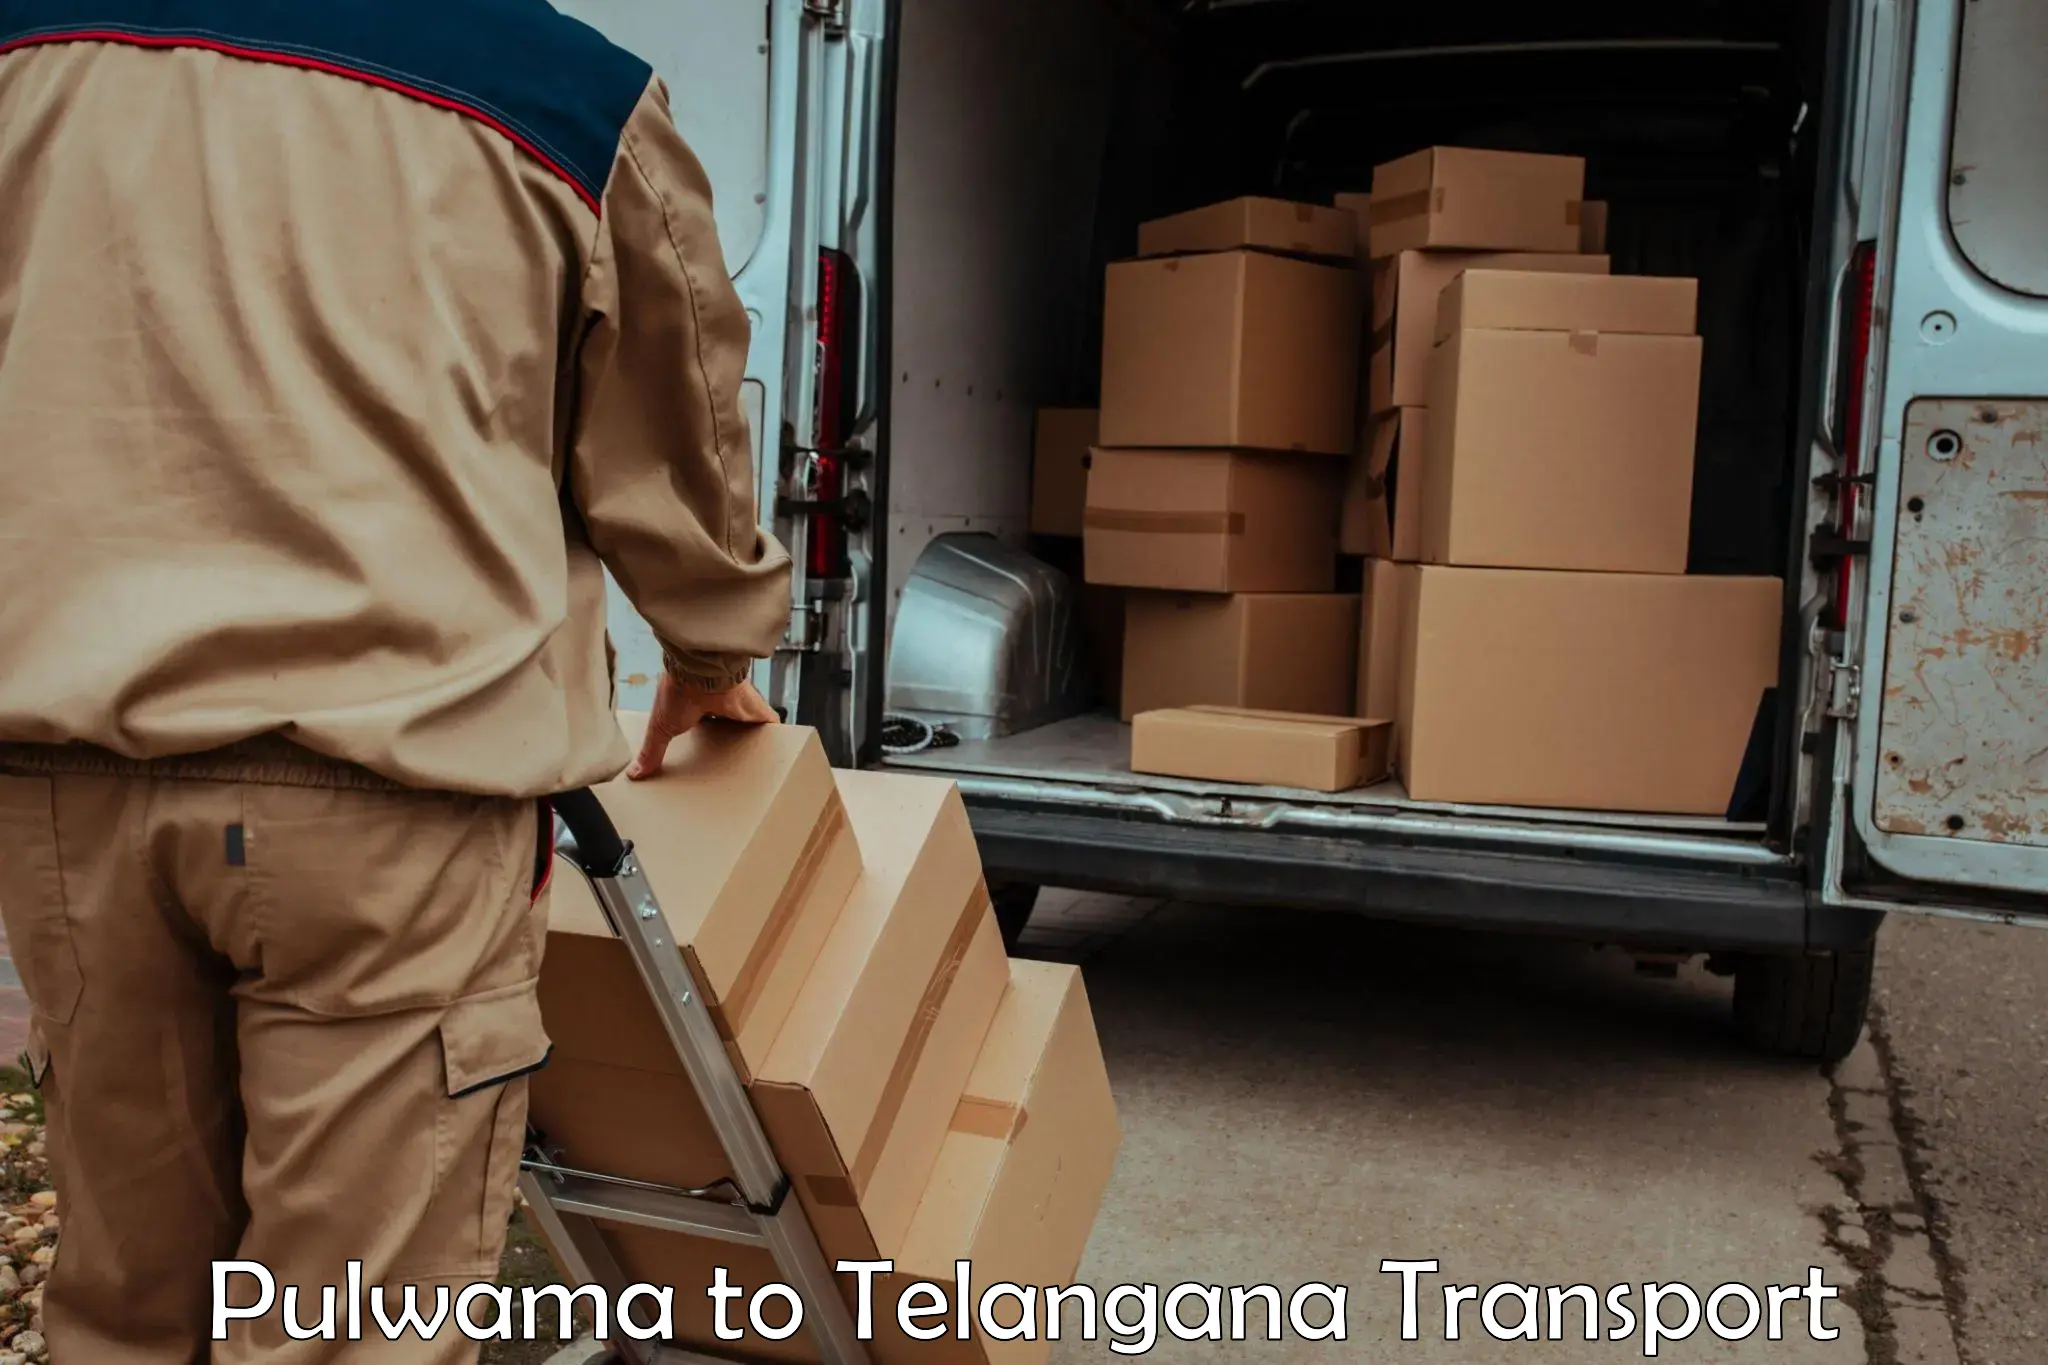 Part load transport service in India Pulwama to Hajipur Mancherial